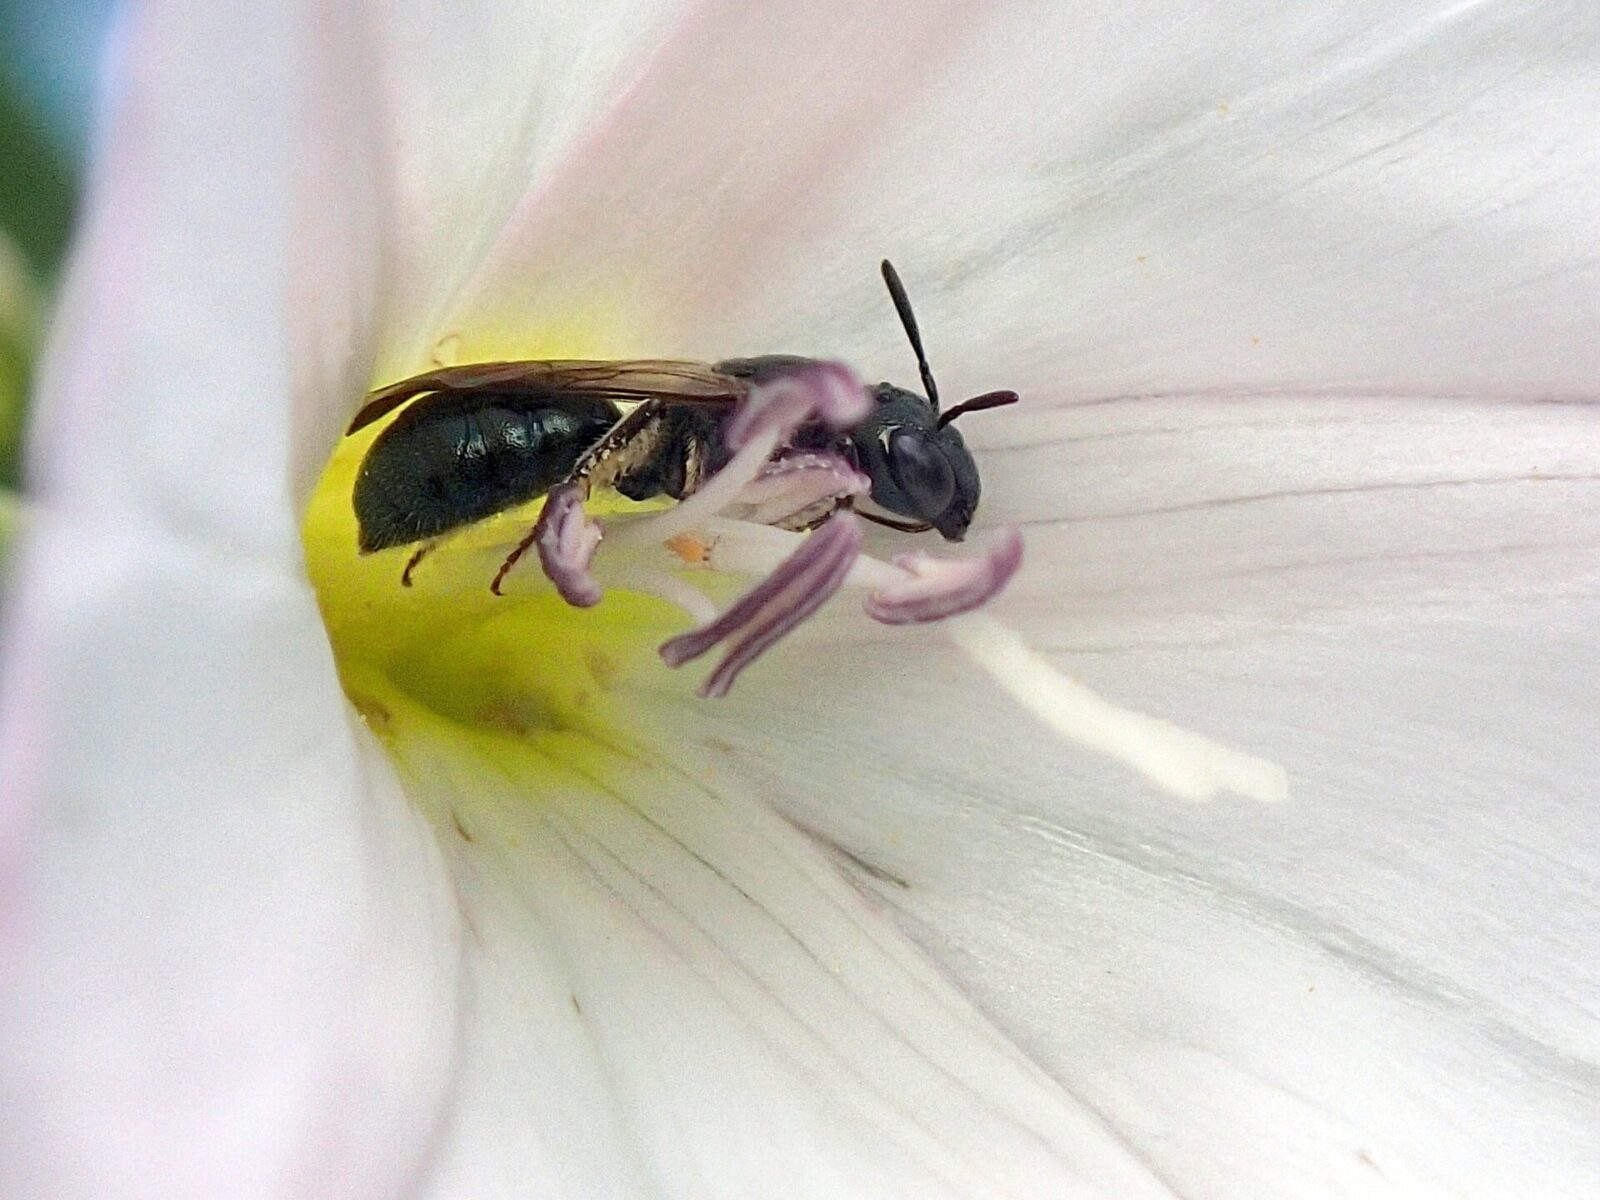 Latest buzz: rare bees essential part of diverse, resilient ecosystems